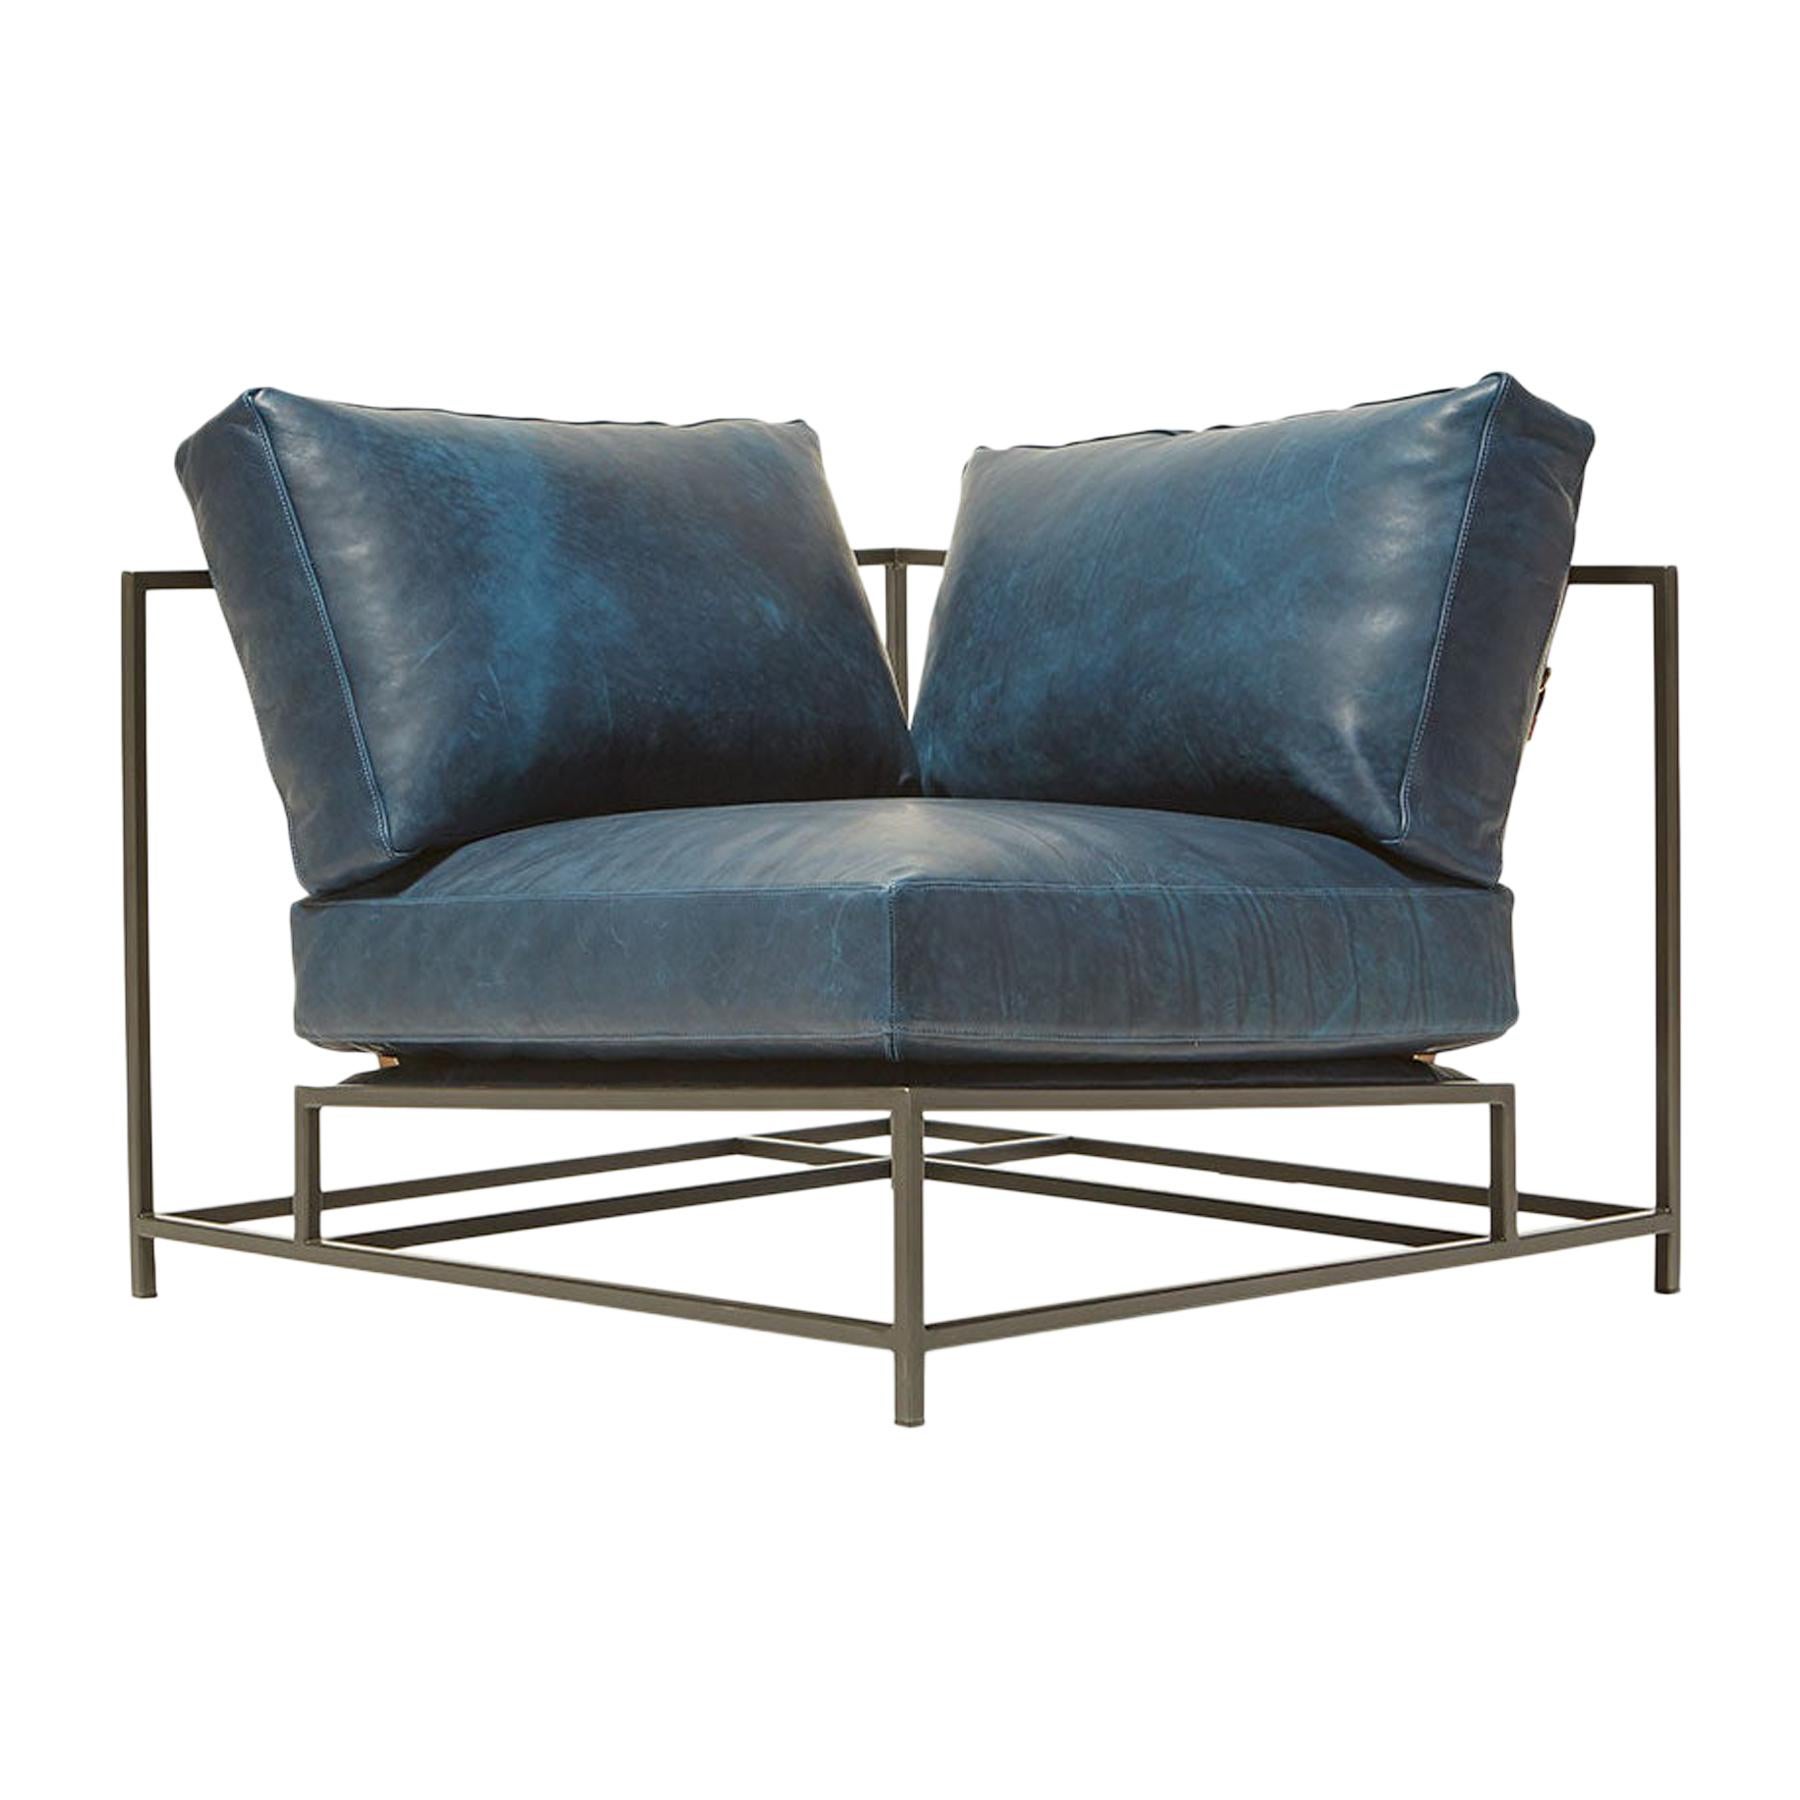 Brentwood Navy and Blackened Steel Corner Chair